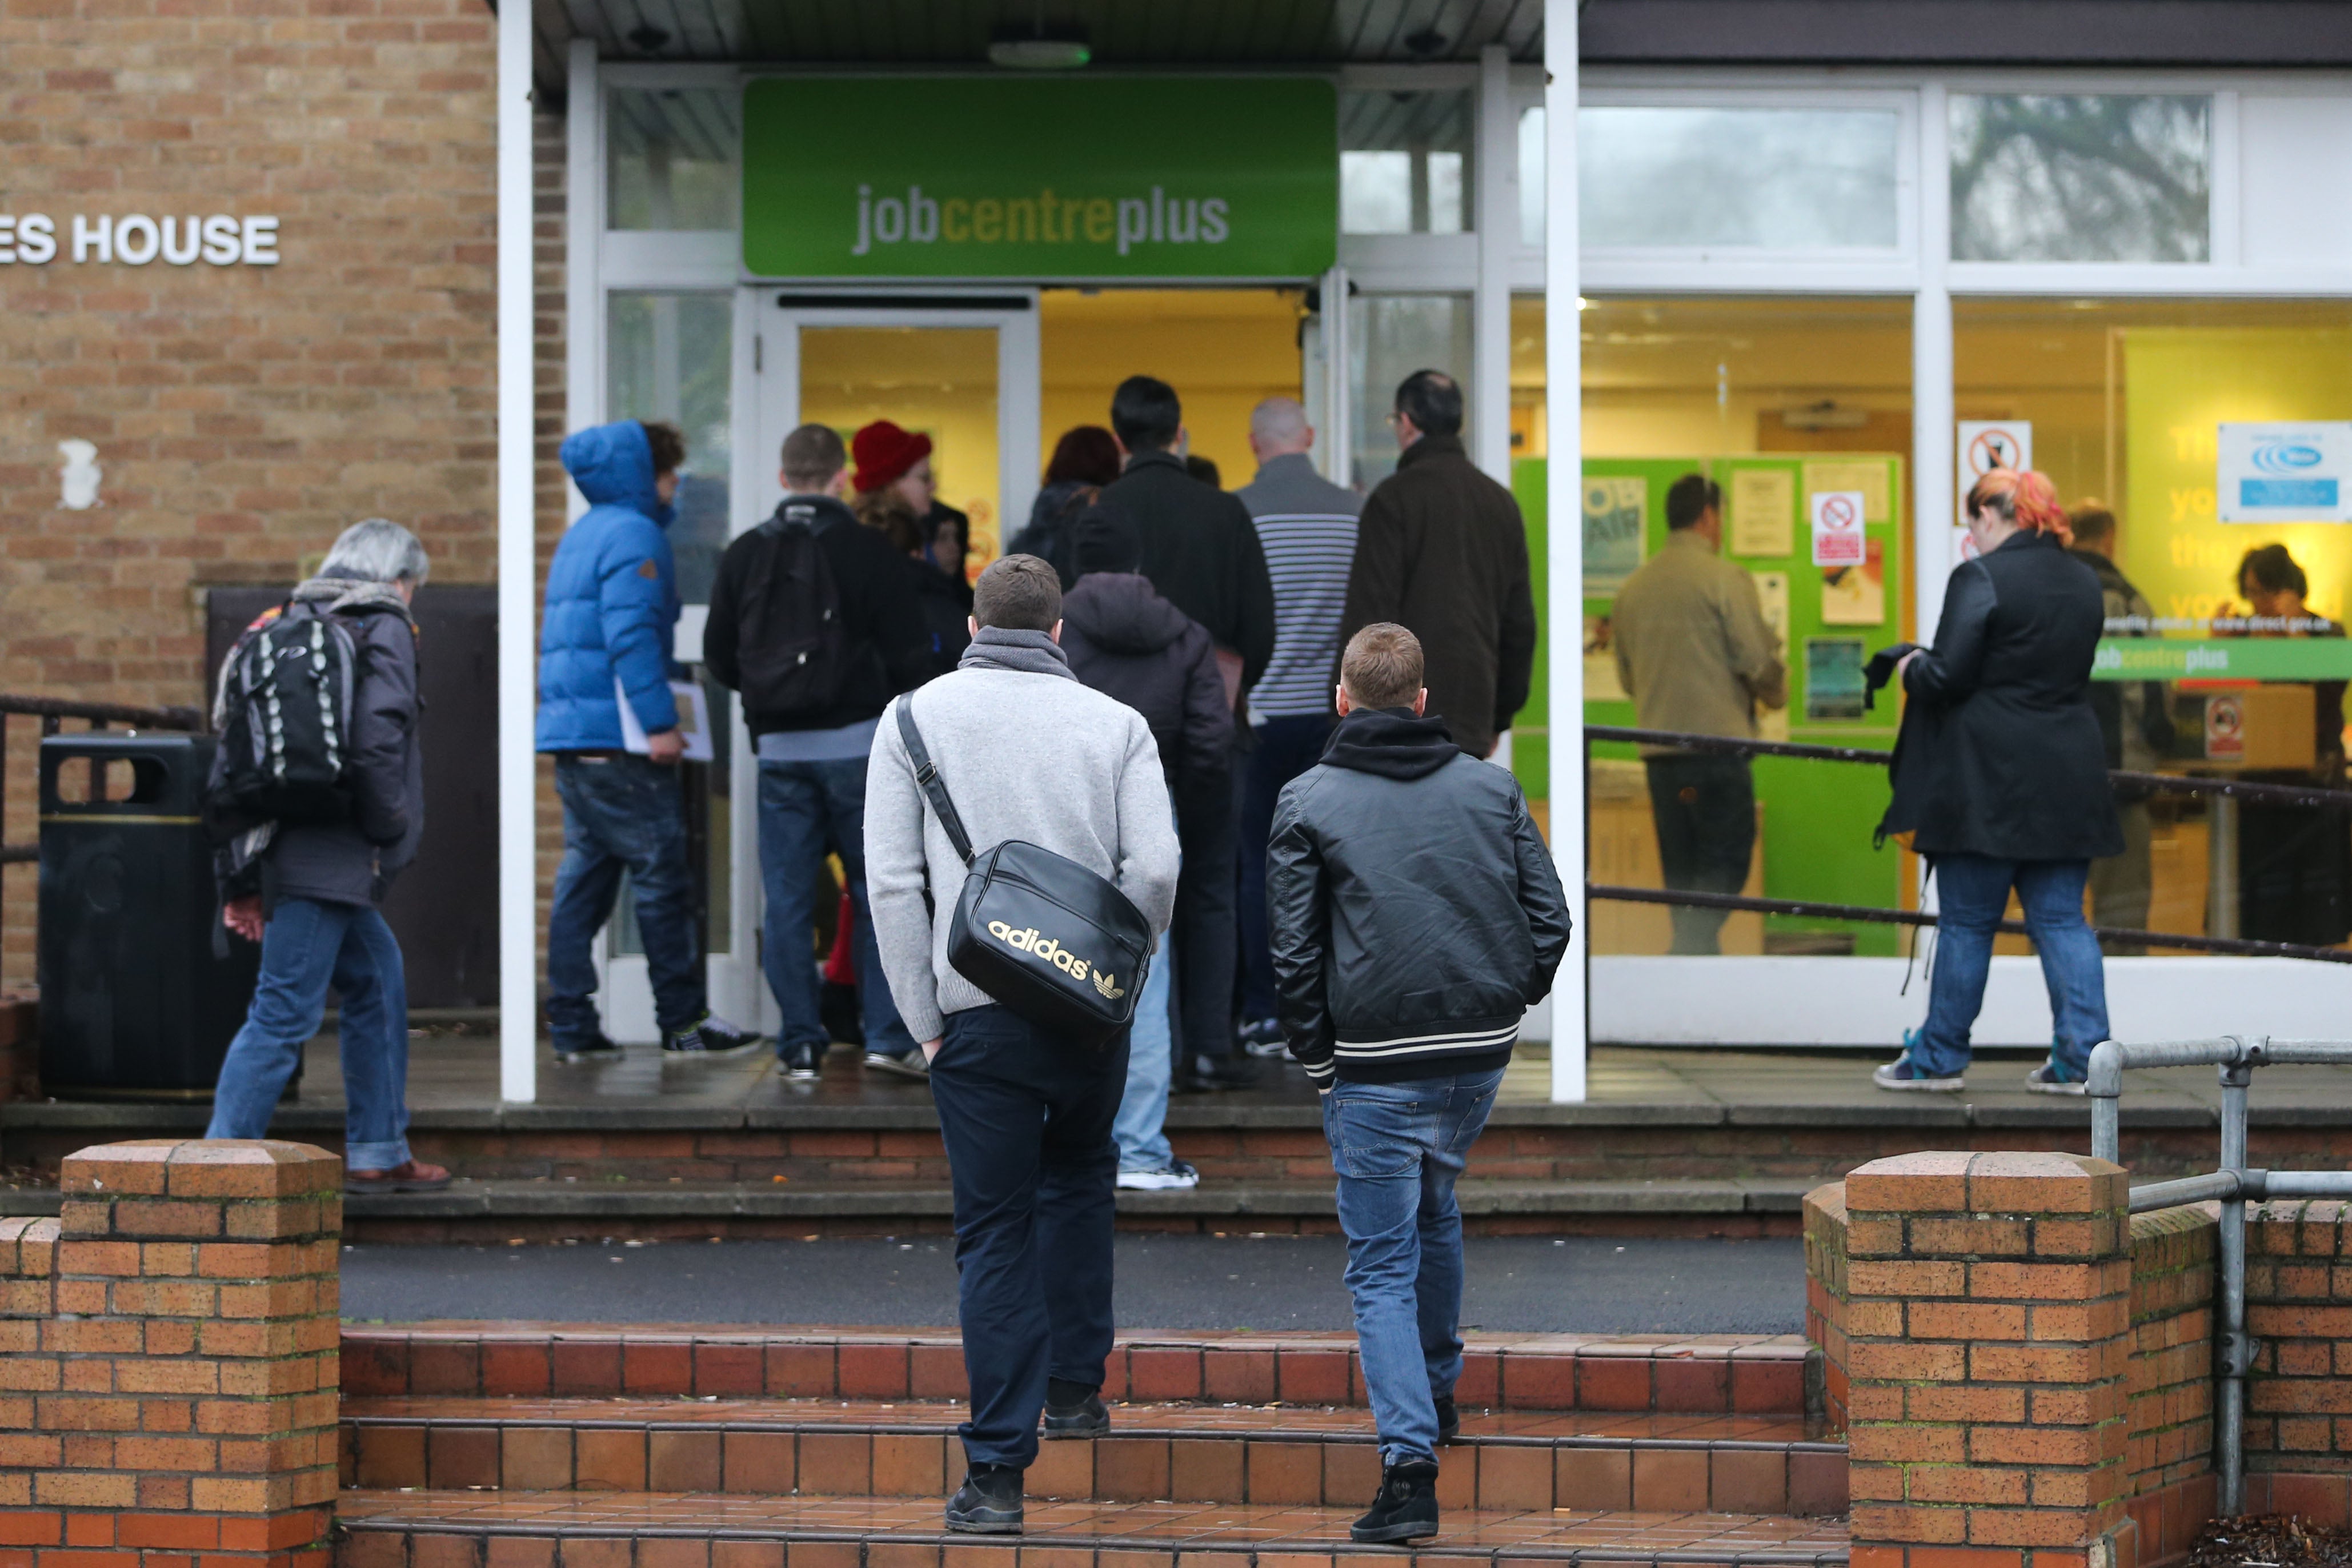 Unemployment rates soared after the banking crash